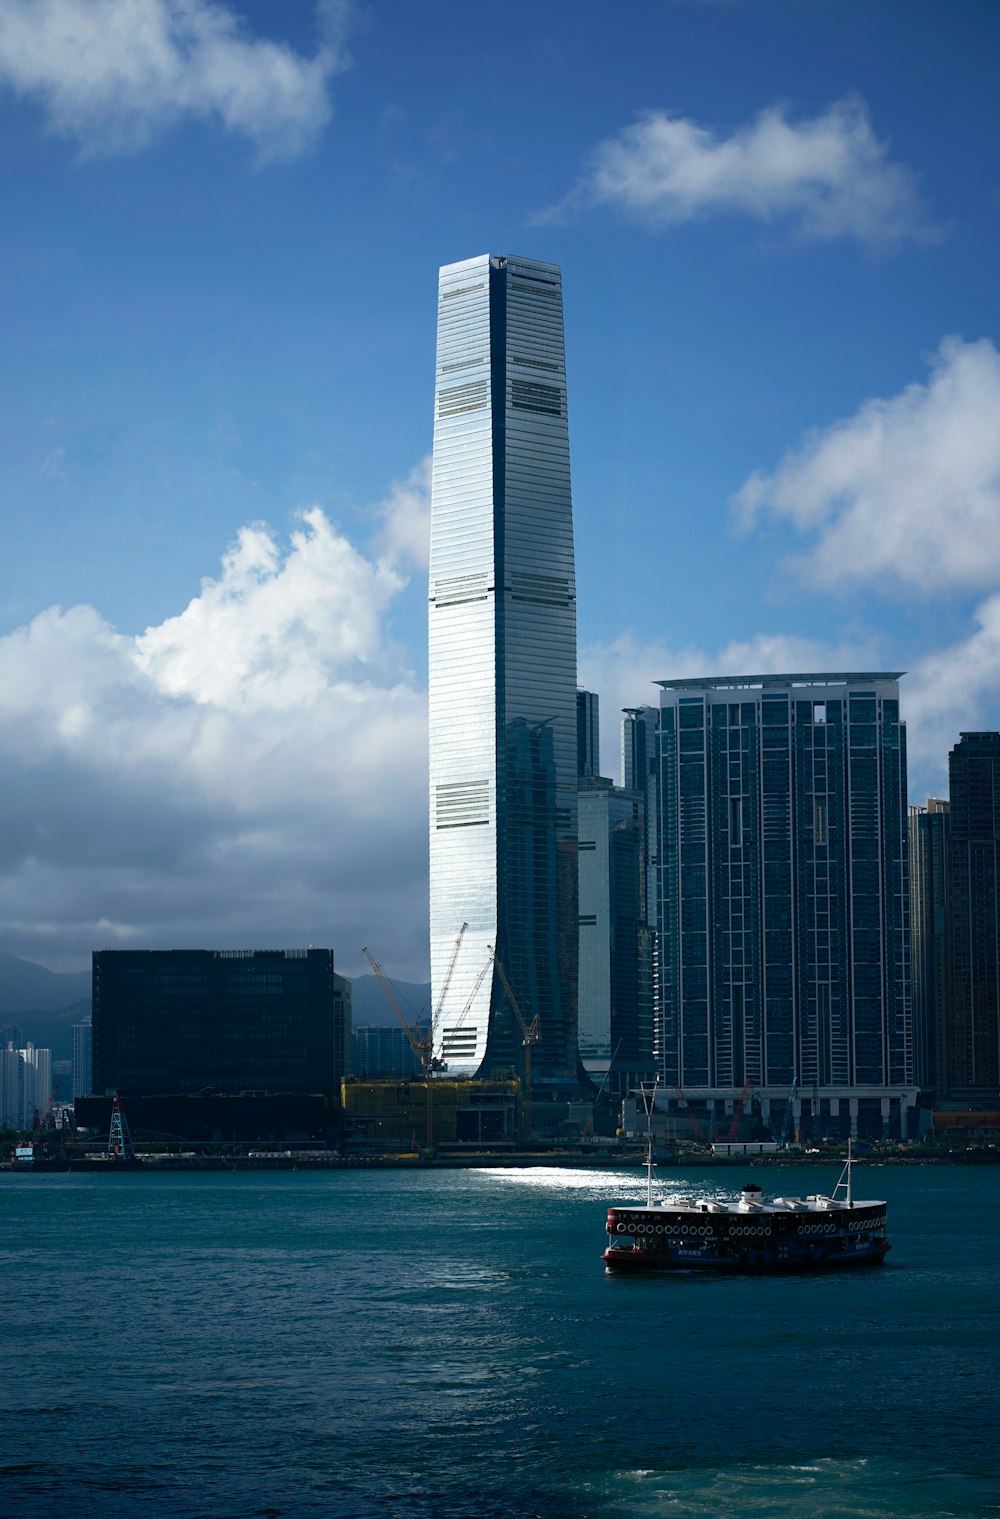 a boat in a body of water near a tall building